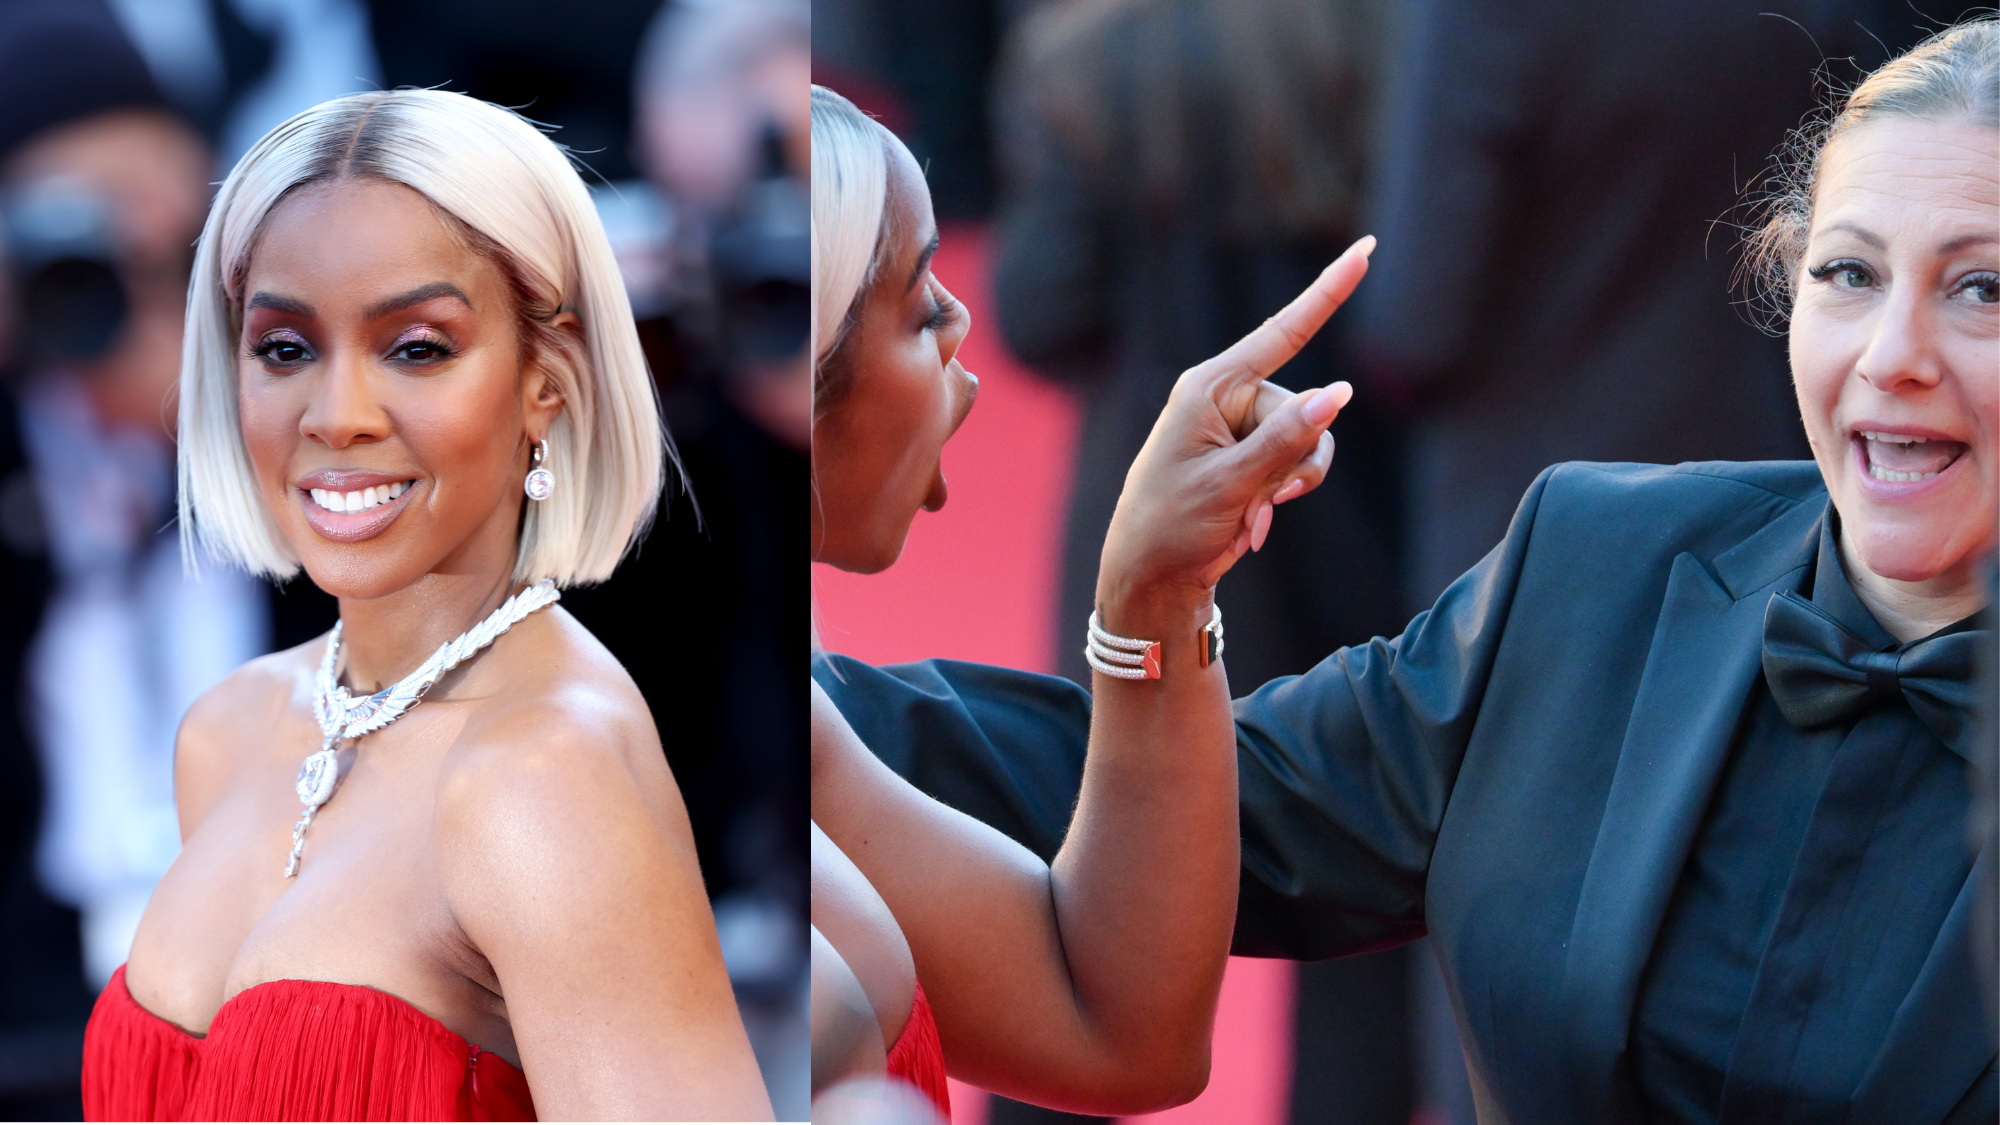 Kelly Rowland Scolded An “Aggressive” Security Guard At Cannes Film Festival, Here’s Why